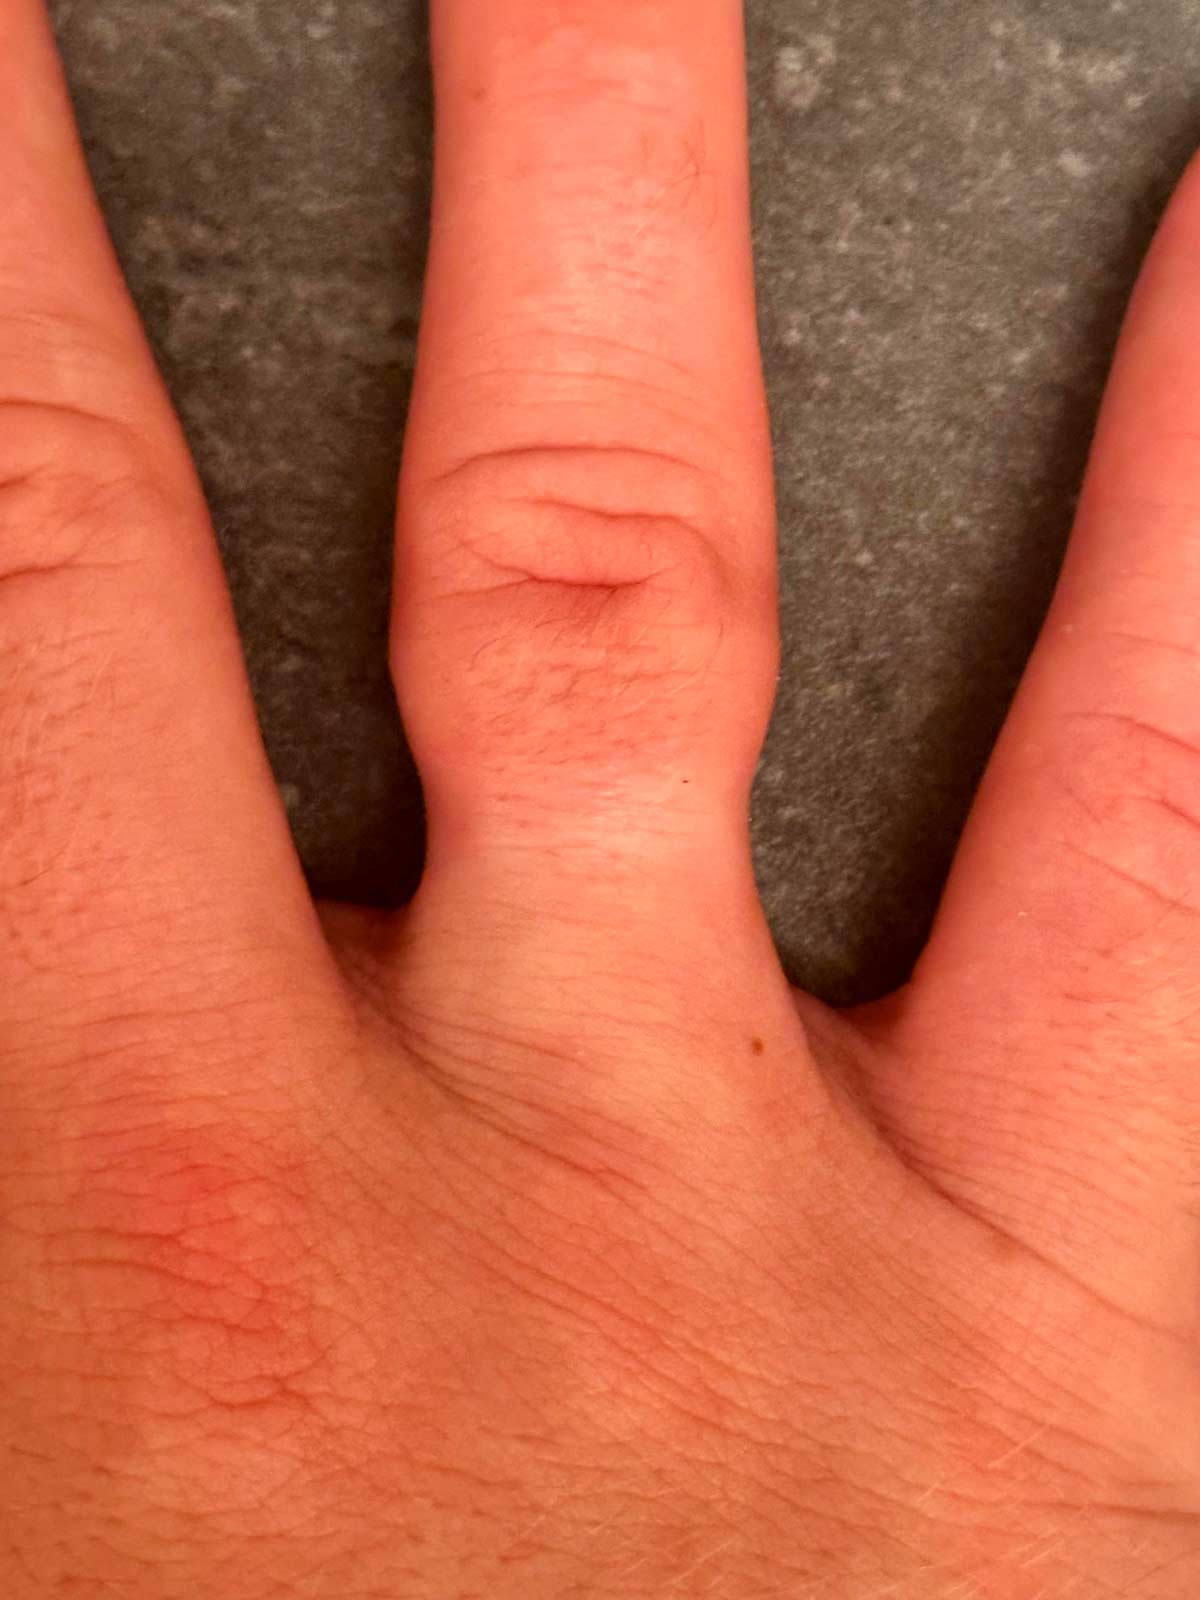 Hourglass finger after I finally got a ring off that’s been on for 2 1/2 years straight